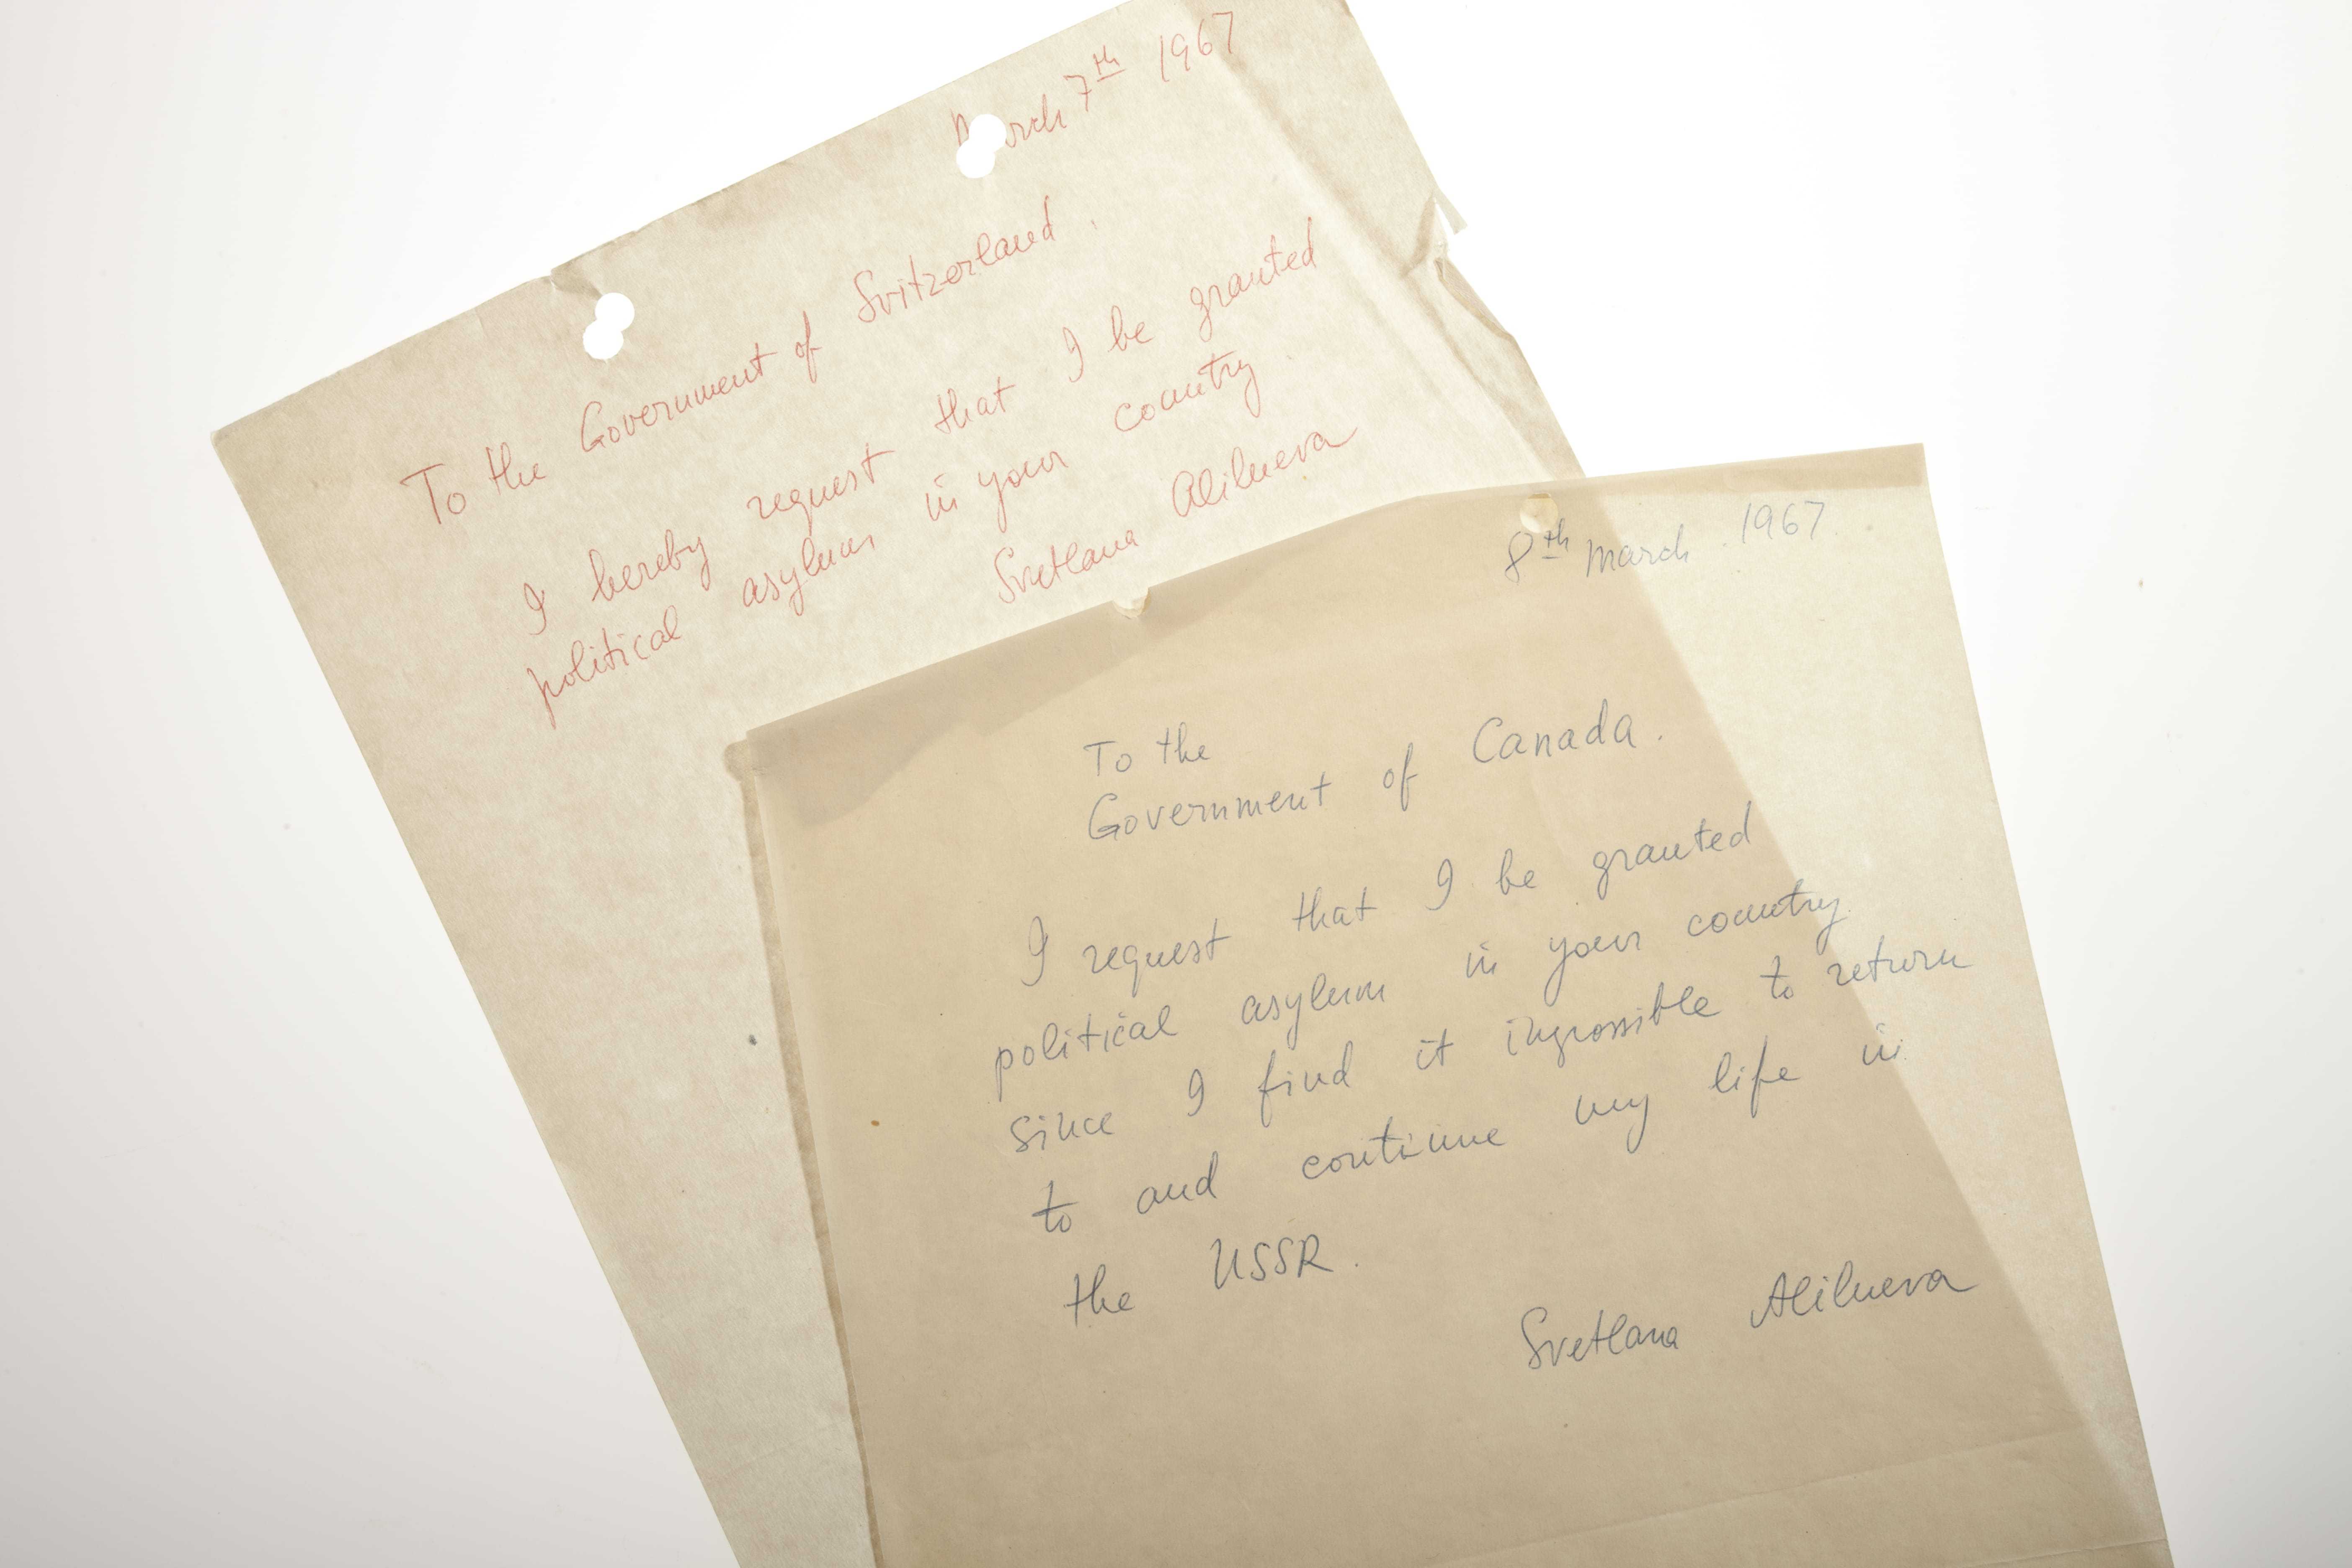 Two handwritten letters from Svetlana Alliluyeva, one addressed to the government of Switzerland and one to the Government of Canada.